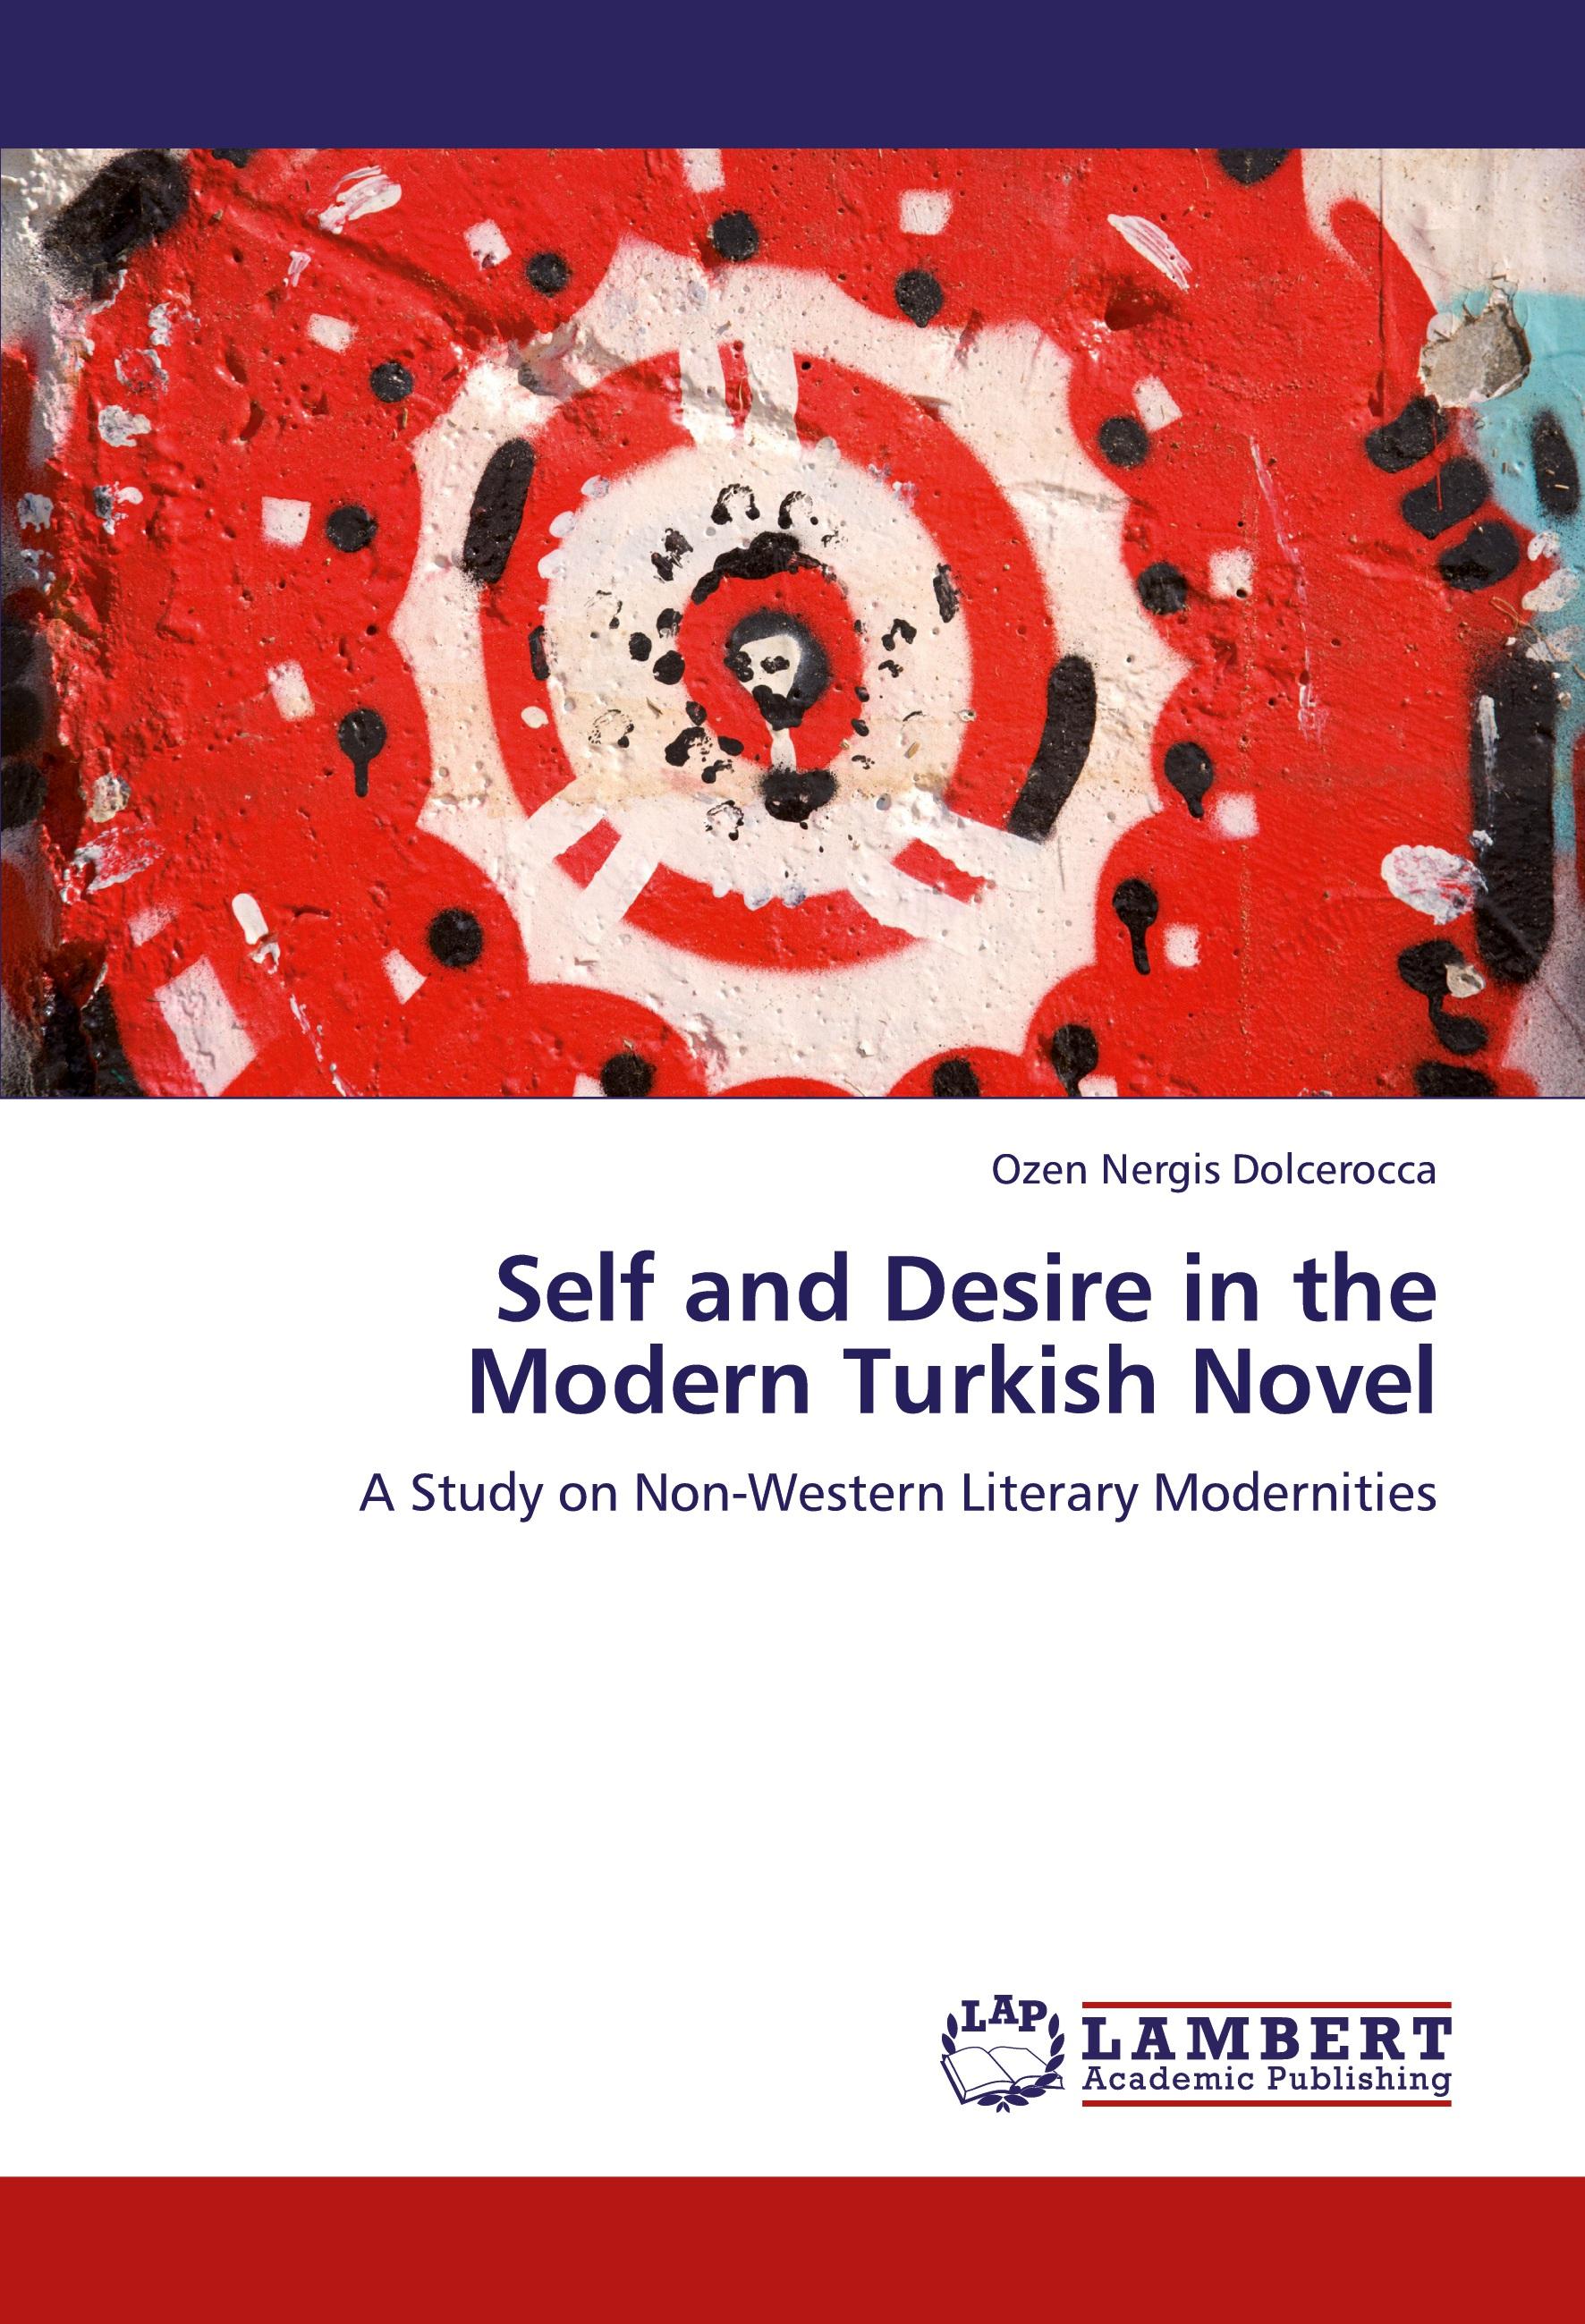 Self and Desire in the Modern Turkish Novel - Ozen Nergis Dolcerocca